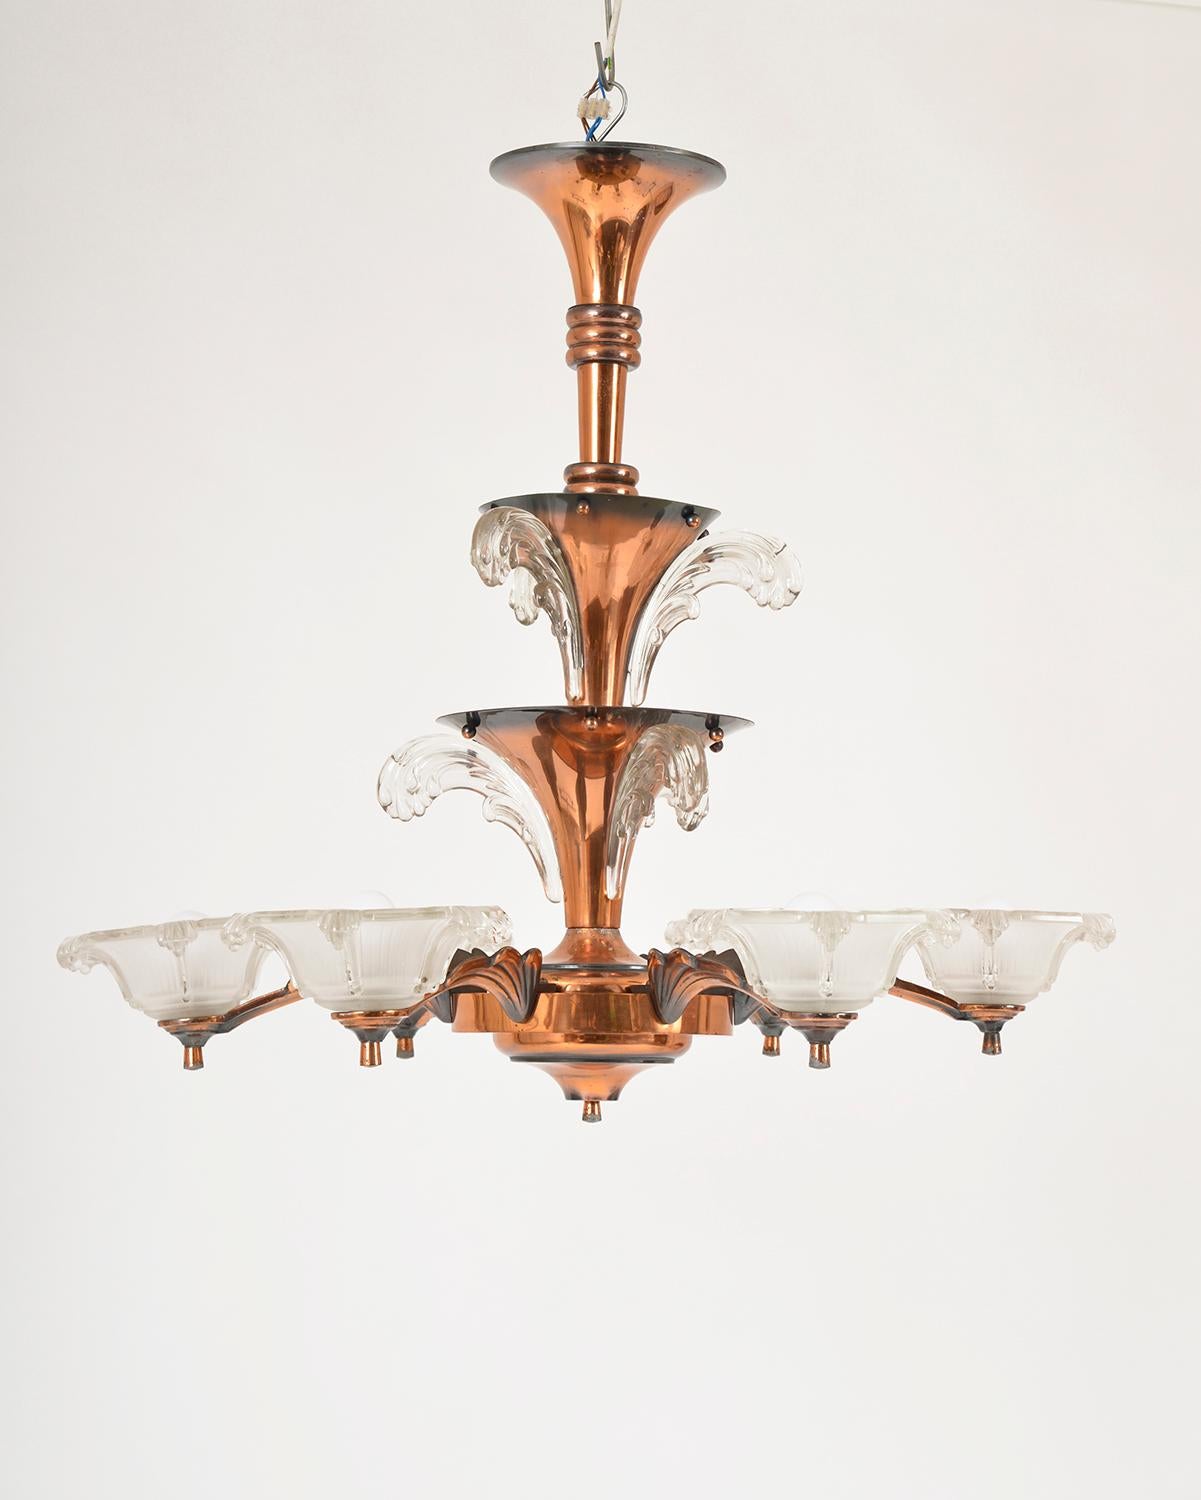 This beautifully organic 1930s French Art Deco chandelier was designed by Atelier Petitot. The frame of the chandelier has three trumpet cascading tiers, which have an aged copper effect, off which extend six arms with frosted flower glass shades.